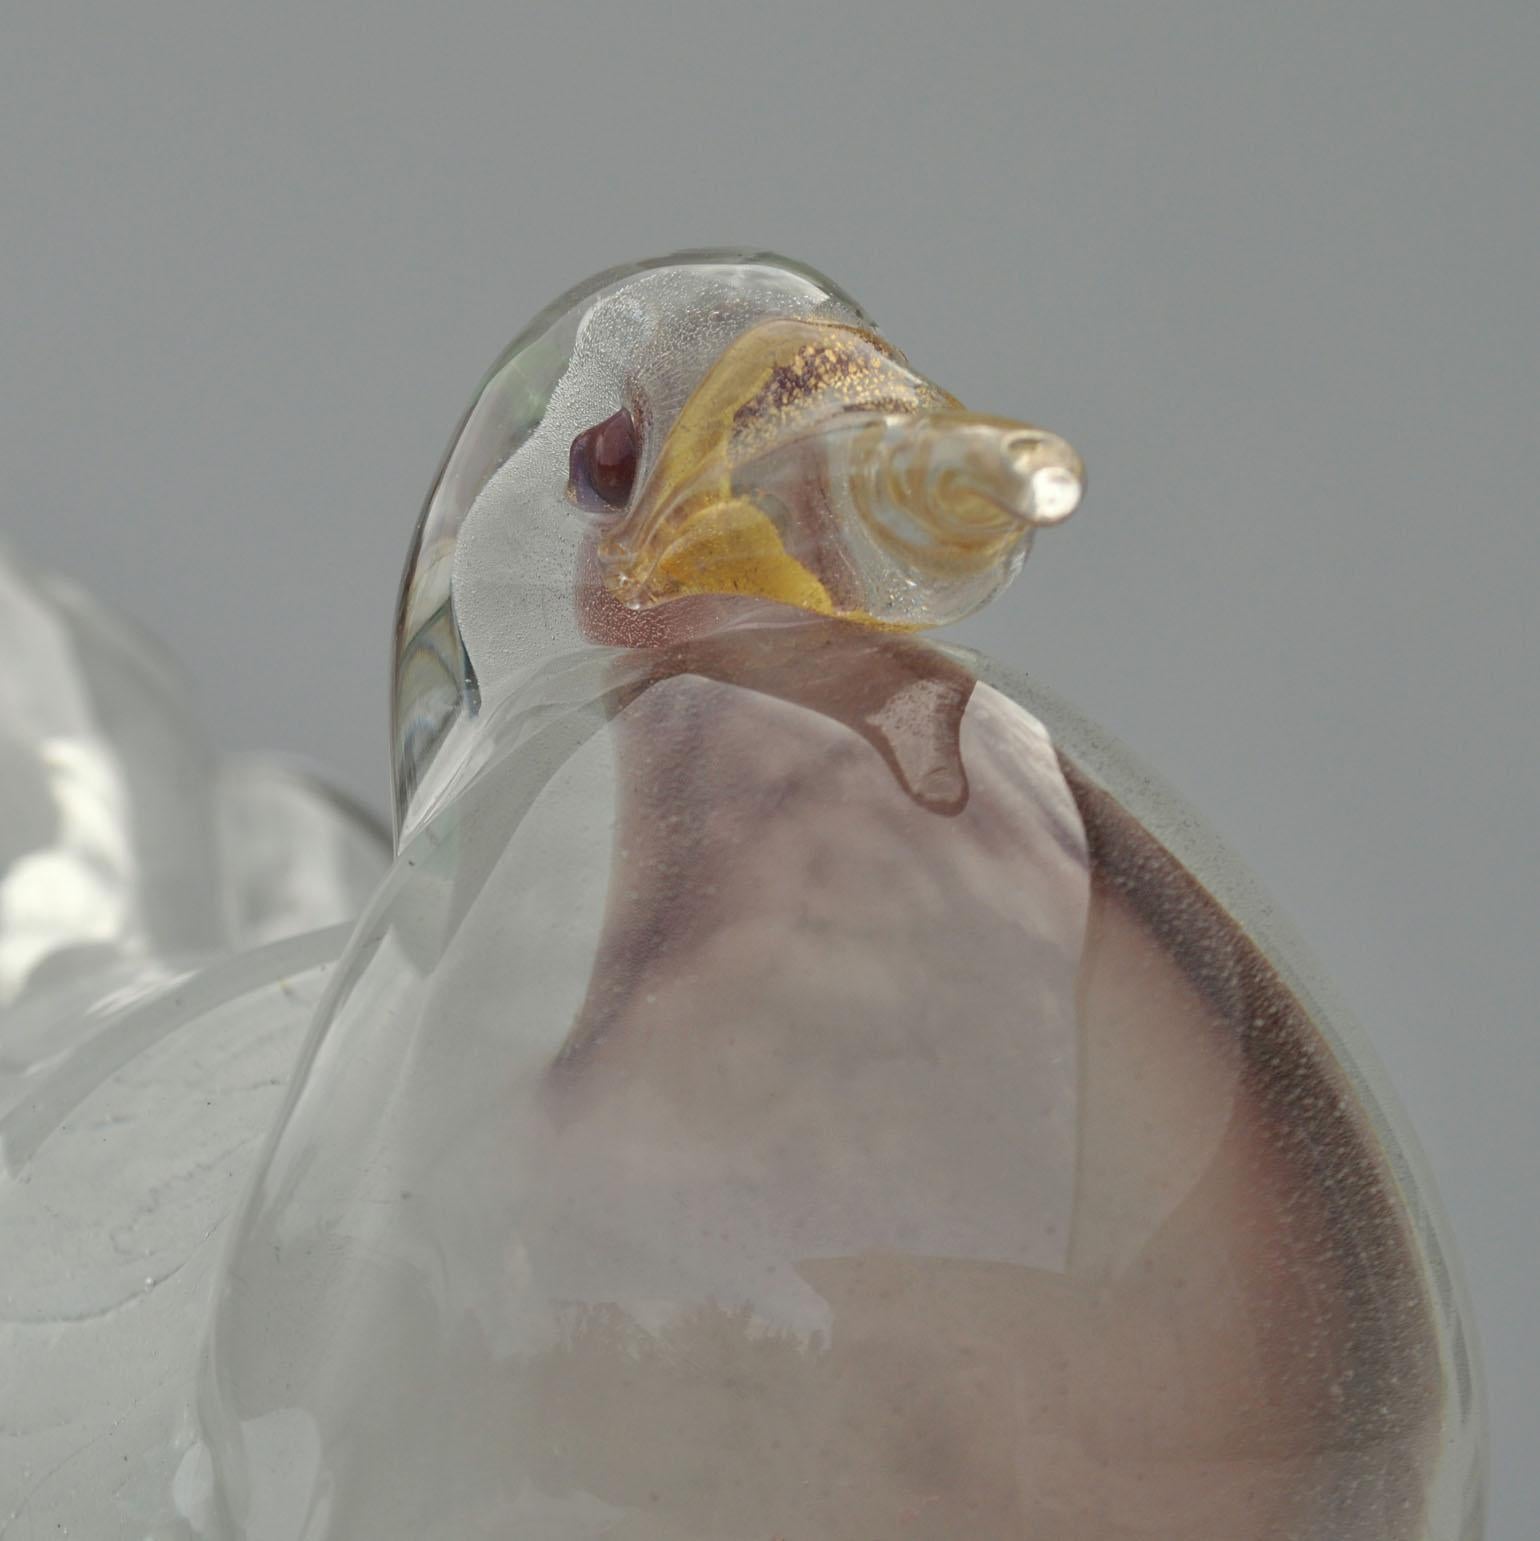 Italian Dove Sculpture Hand Blown Glass Attributed to Seguso 1950s Italy